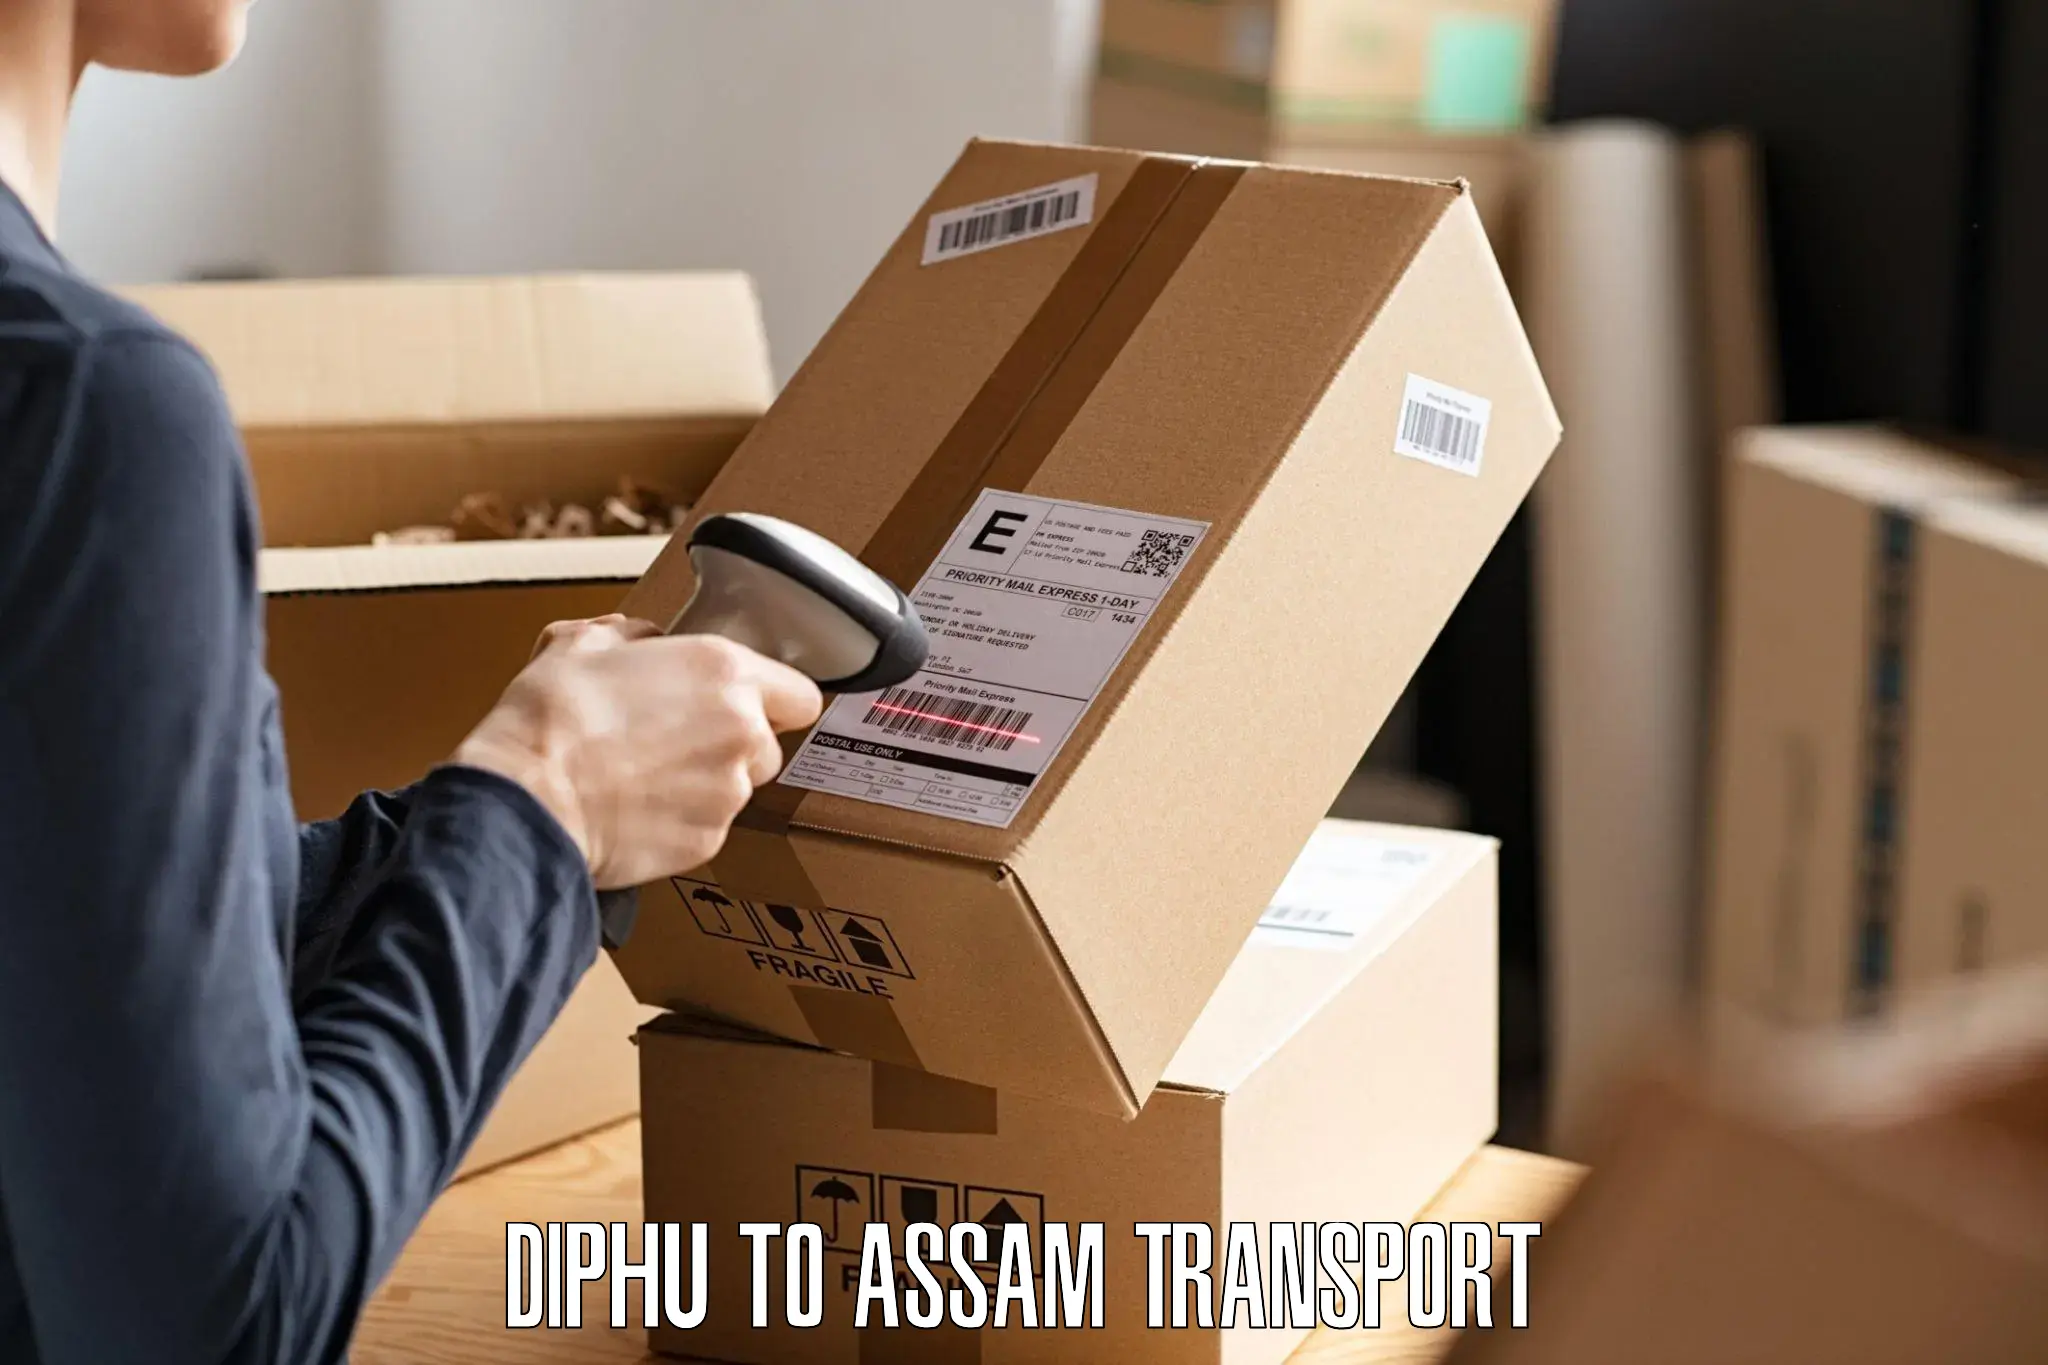 Parcel transport services Diphu to Dhemaji